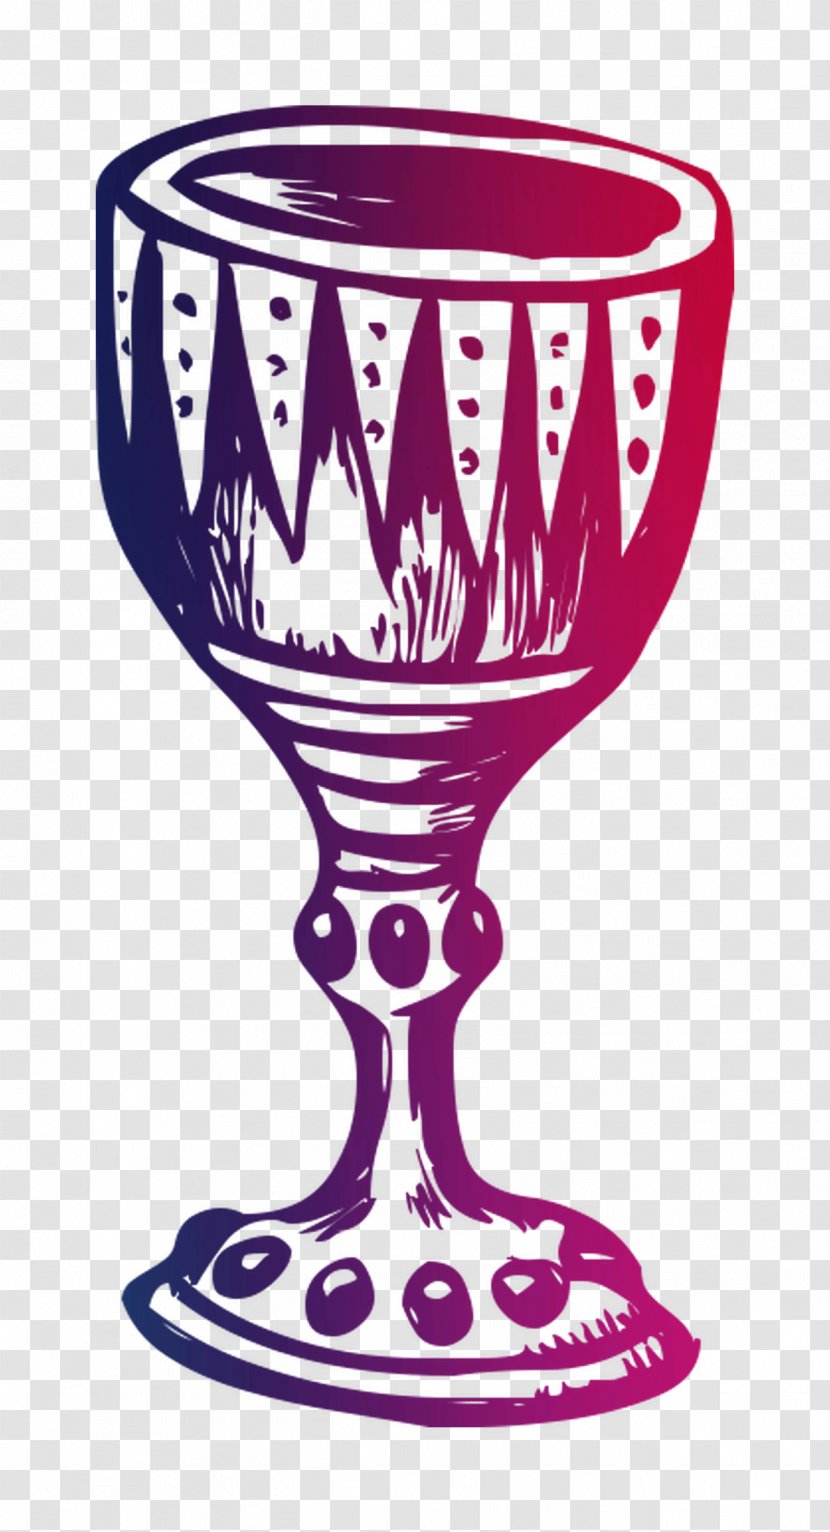 Wine Glass Champagne Cocktail Martini - Candle Transparent PNG